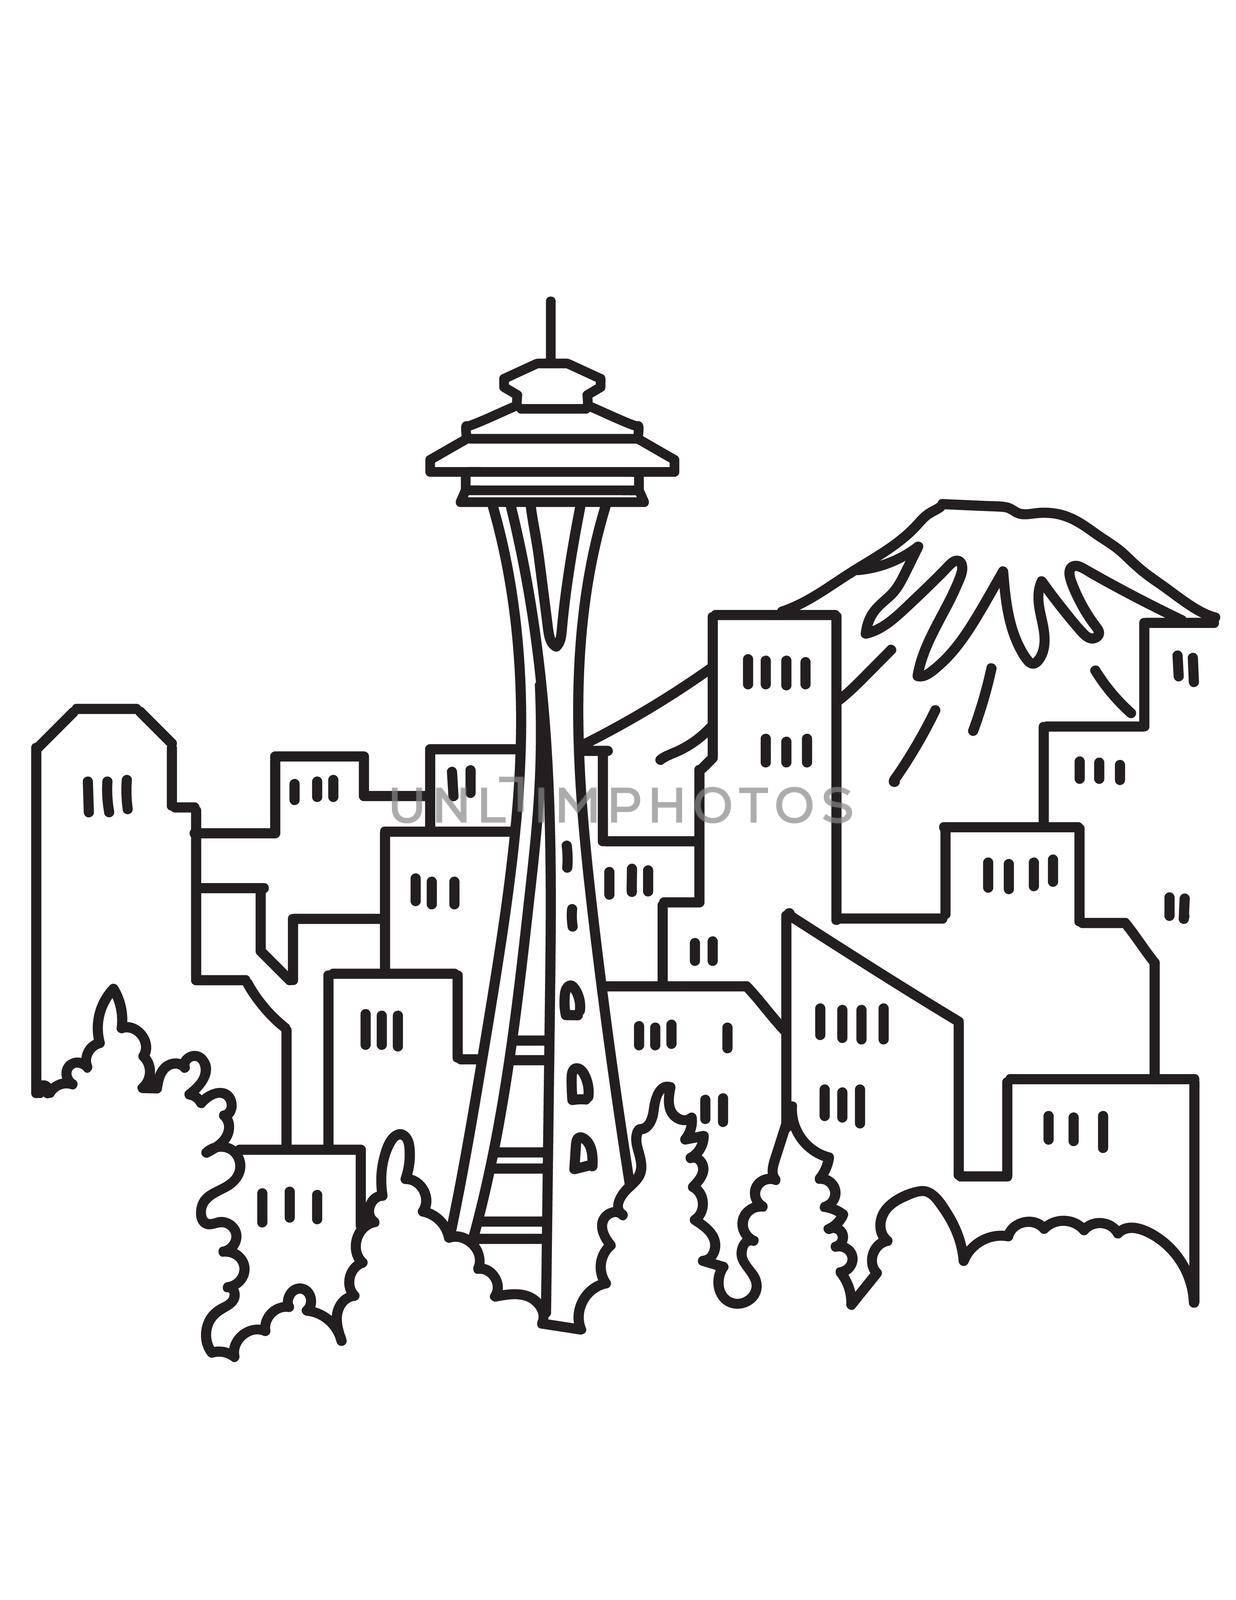 Mono line illustration of Seattle City downtown skyline with Space Needle landmark and Mount Rainier in in Washington State, USA done in monoline line art style.